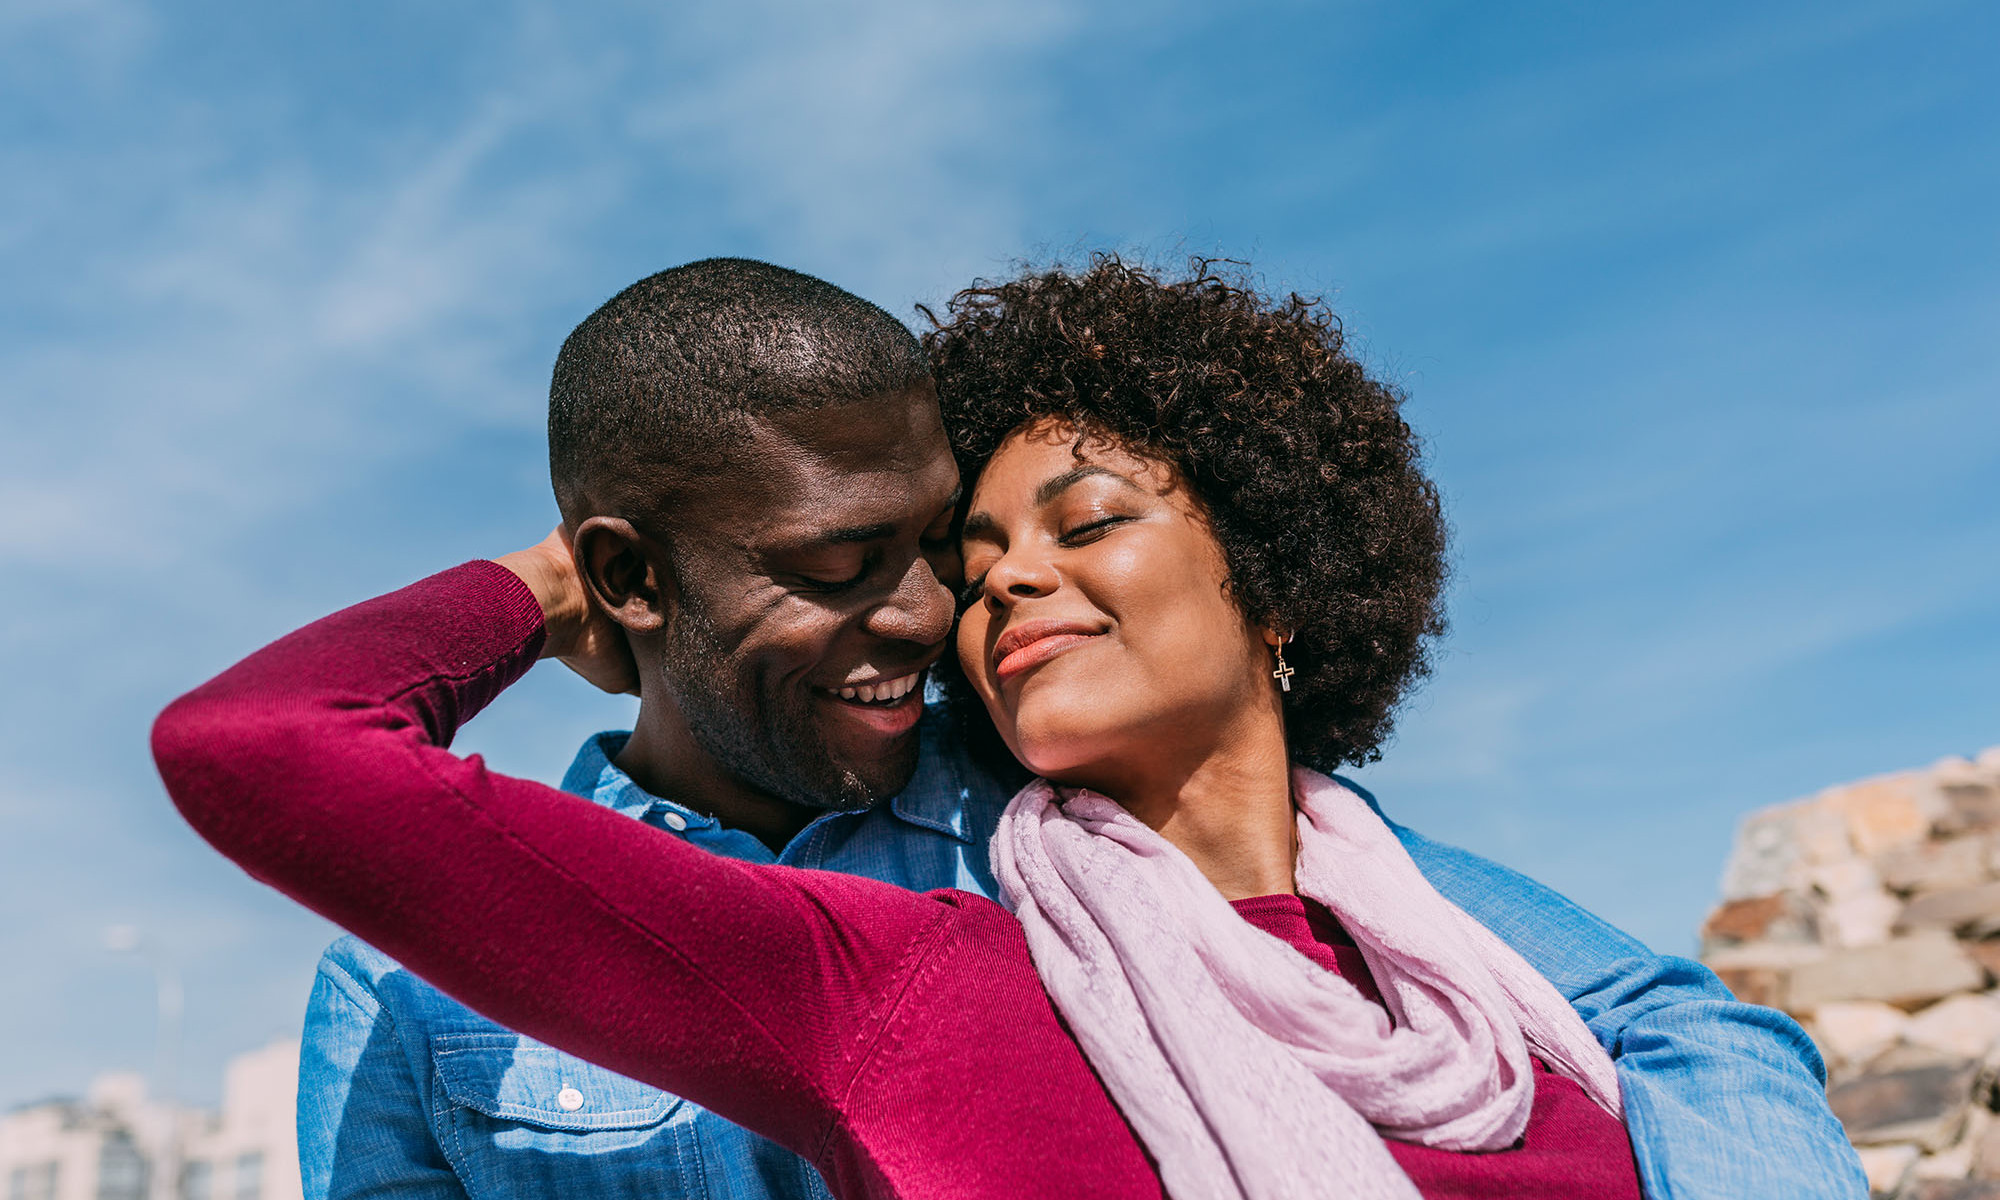 Are You & Your Partner Actually Compatible? Take This 5-Minute Quiz To Find Out